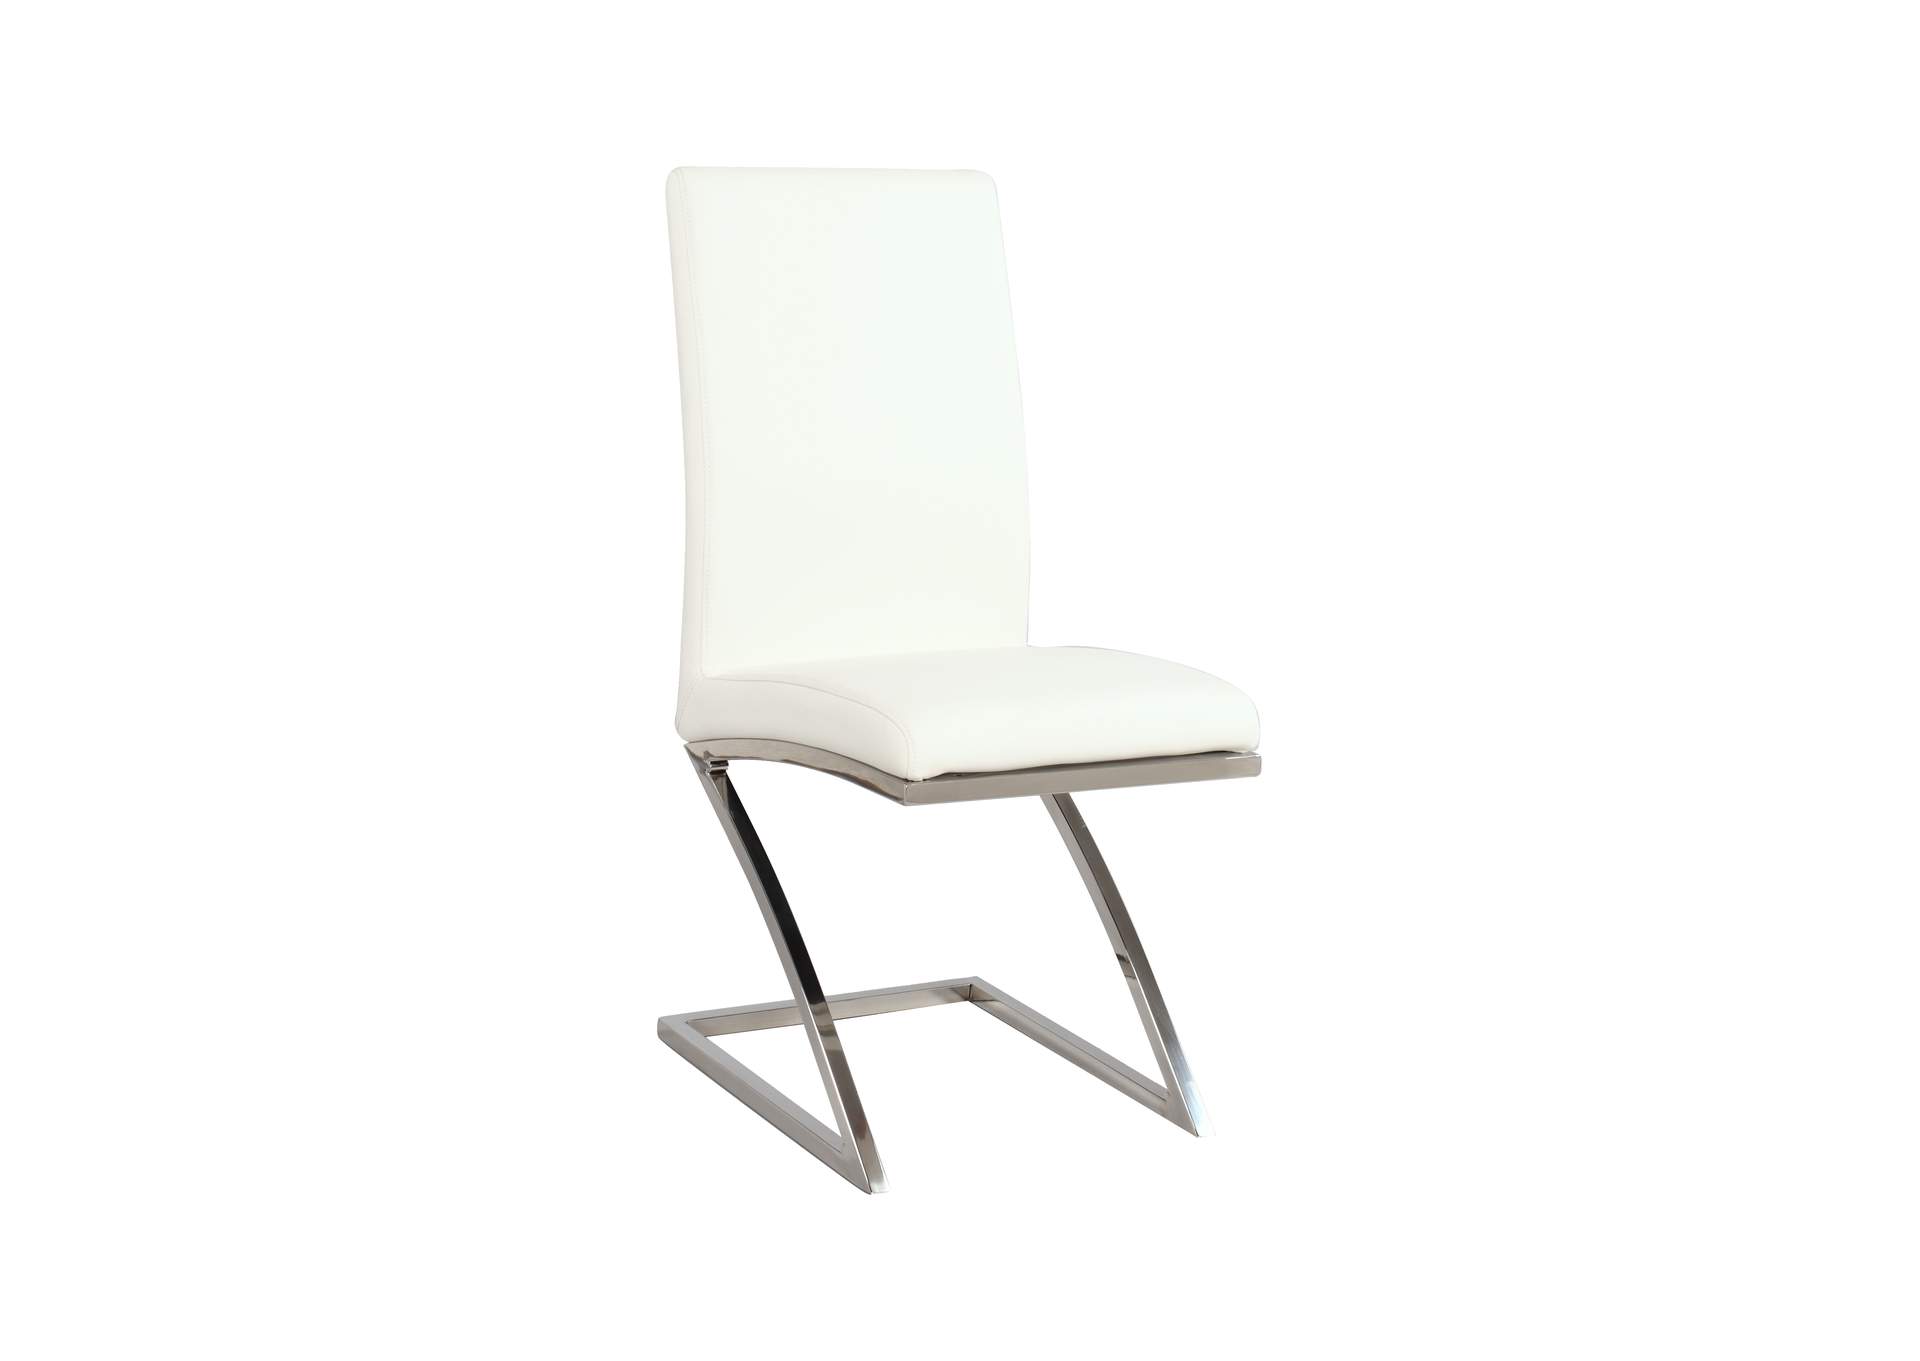 Modern "Z" Frame Contemporary Side Chair,Chintaly Imports